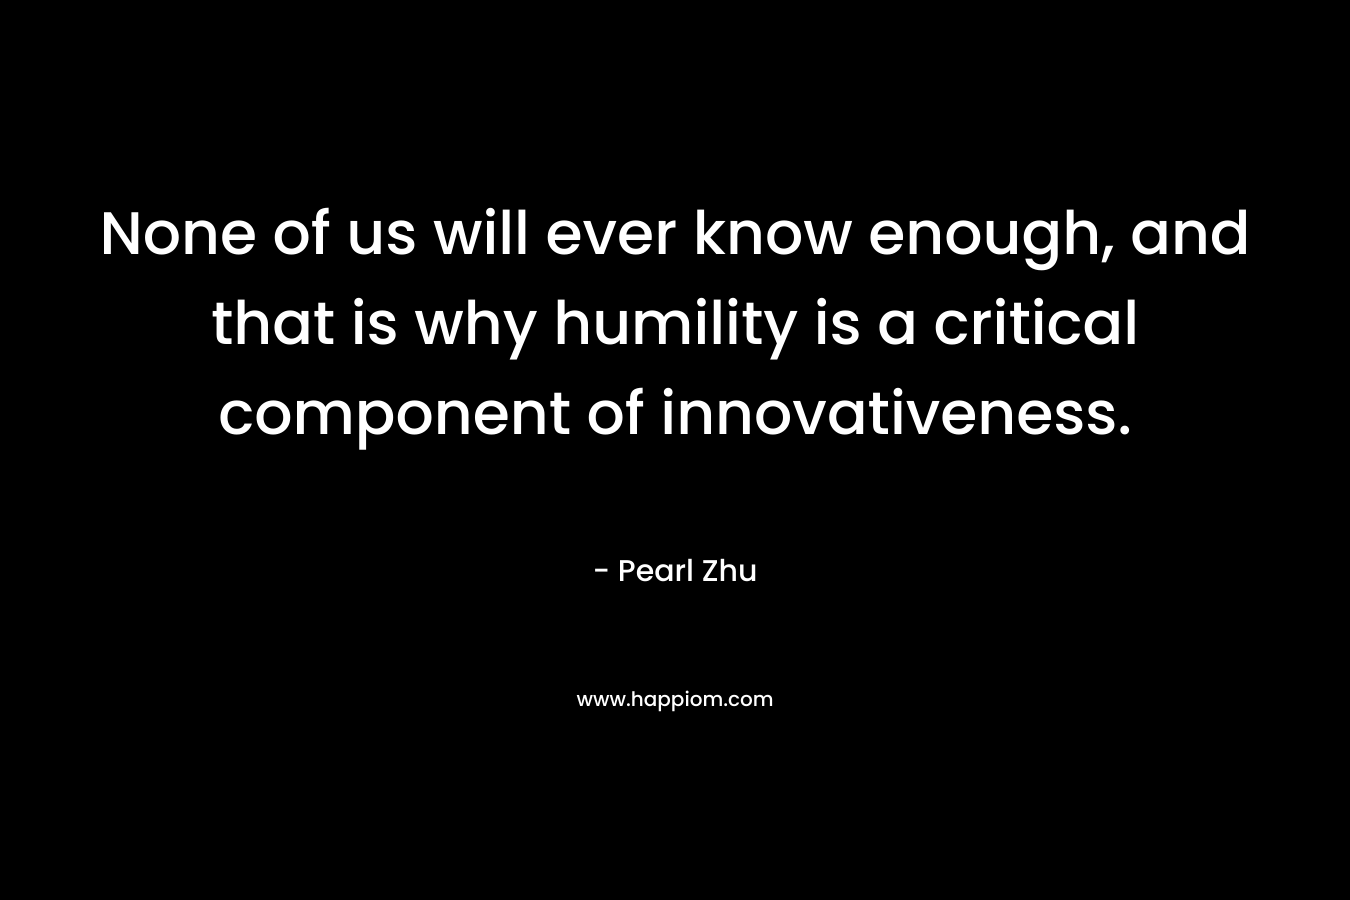 None of us will ever know enough, and that is why humility is a critical component of innovativeness. – Pearl Zhu